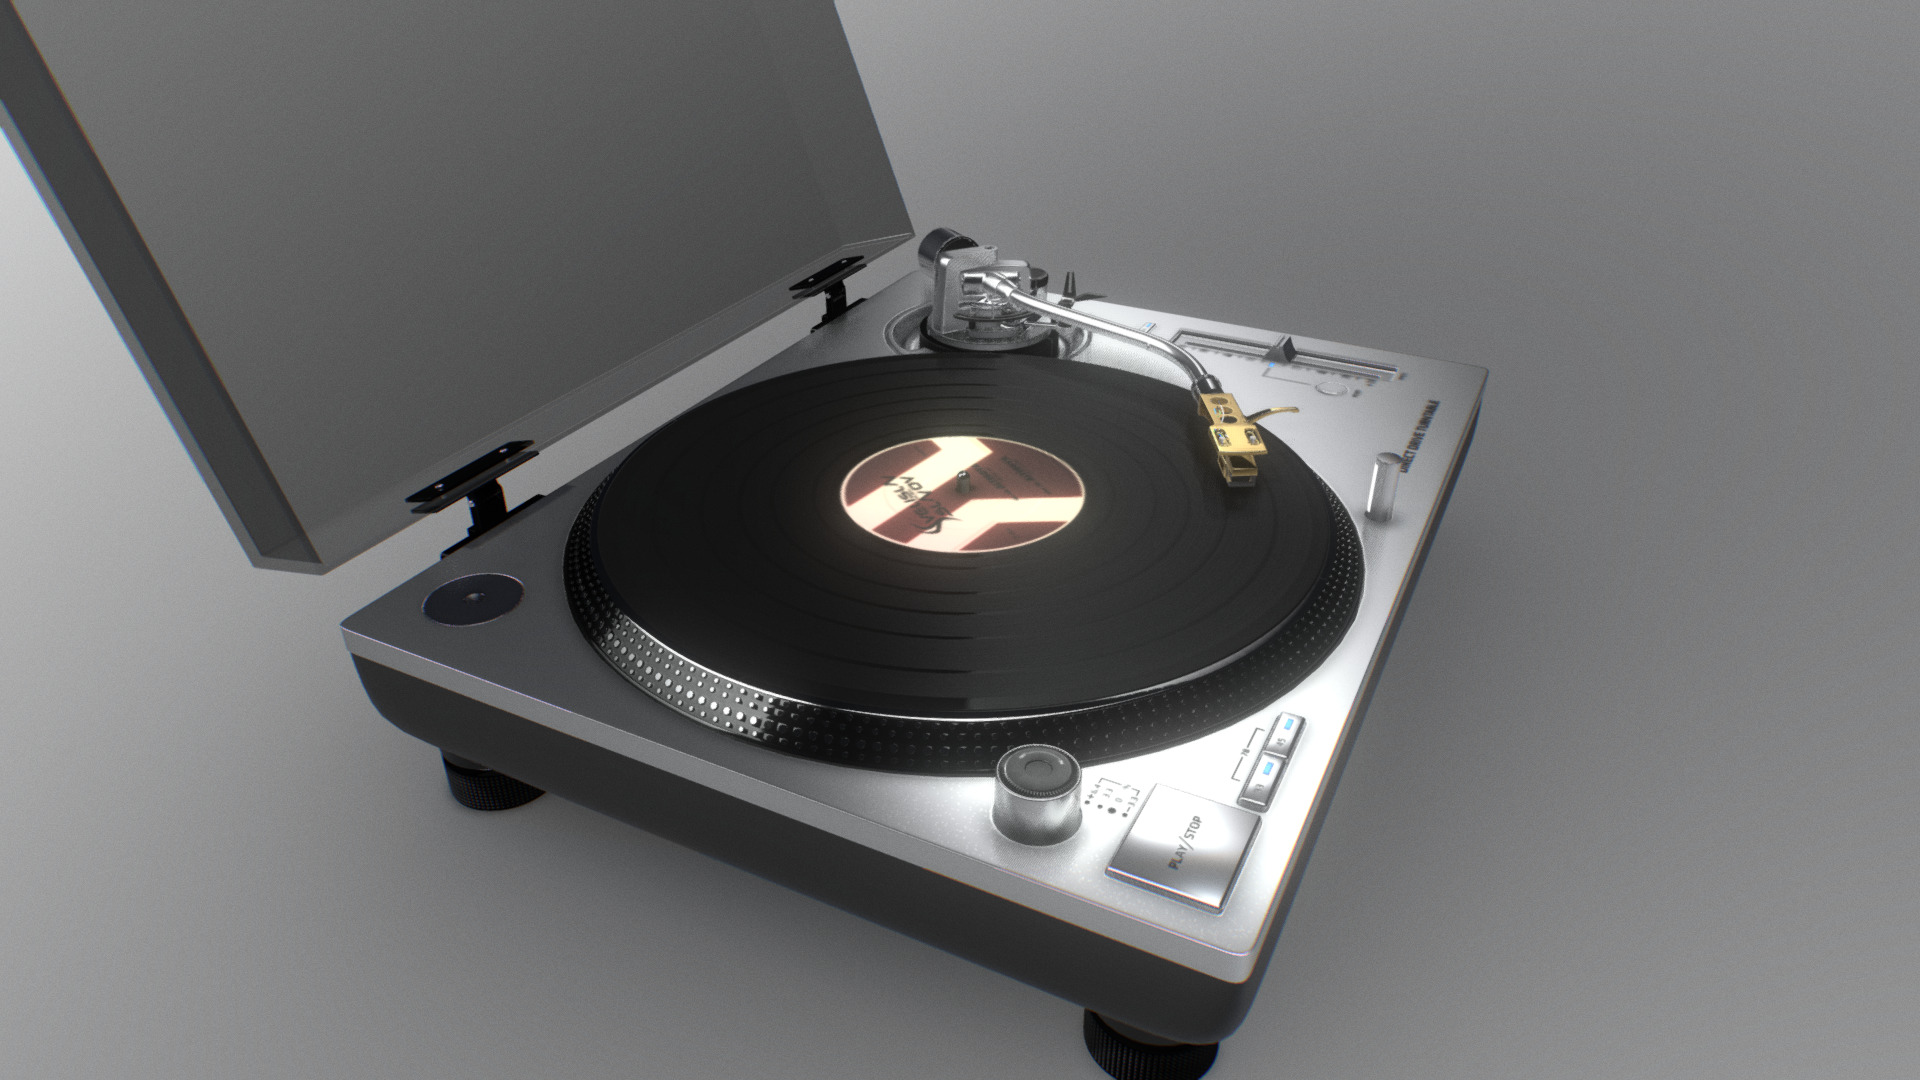 3D model Technics Turntable Vinyl Record Player - This is a 3D model of the Technics Turntable Vinyl Record Player. The 3D model is about a record player with a record.